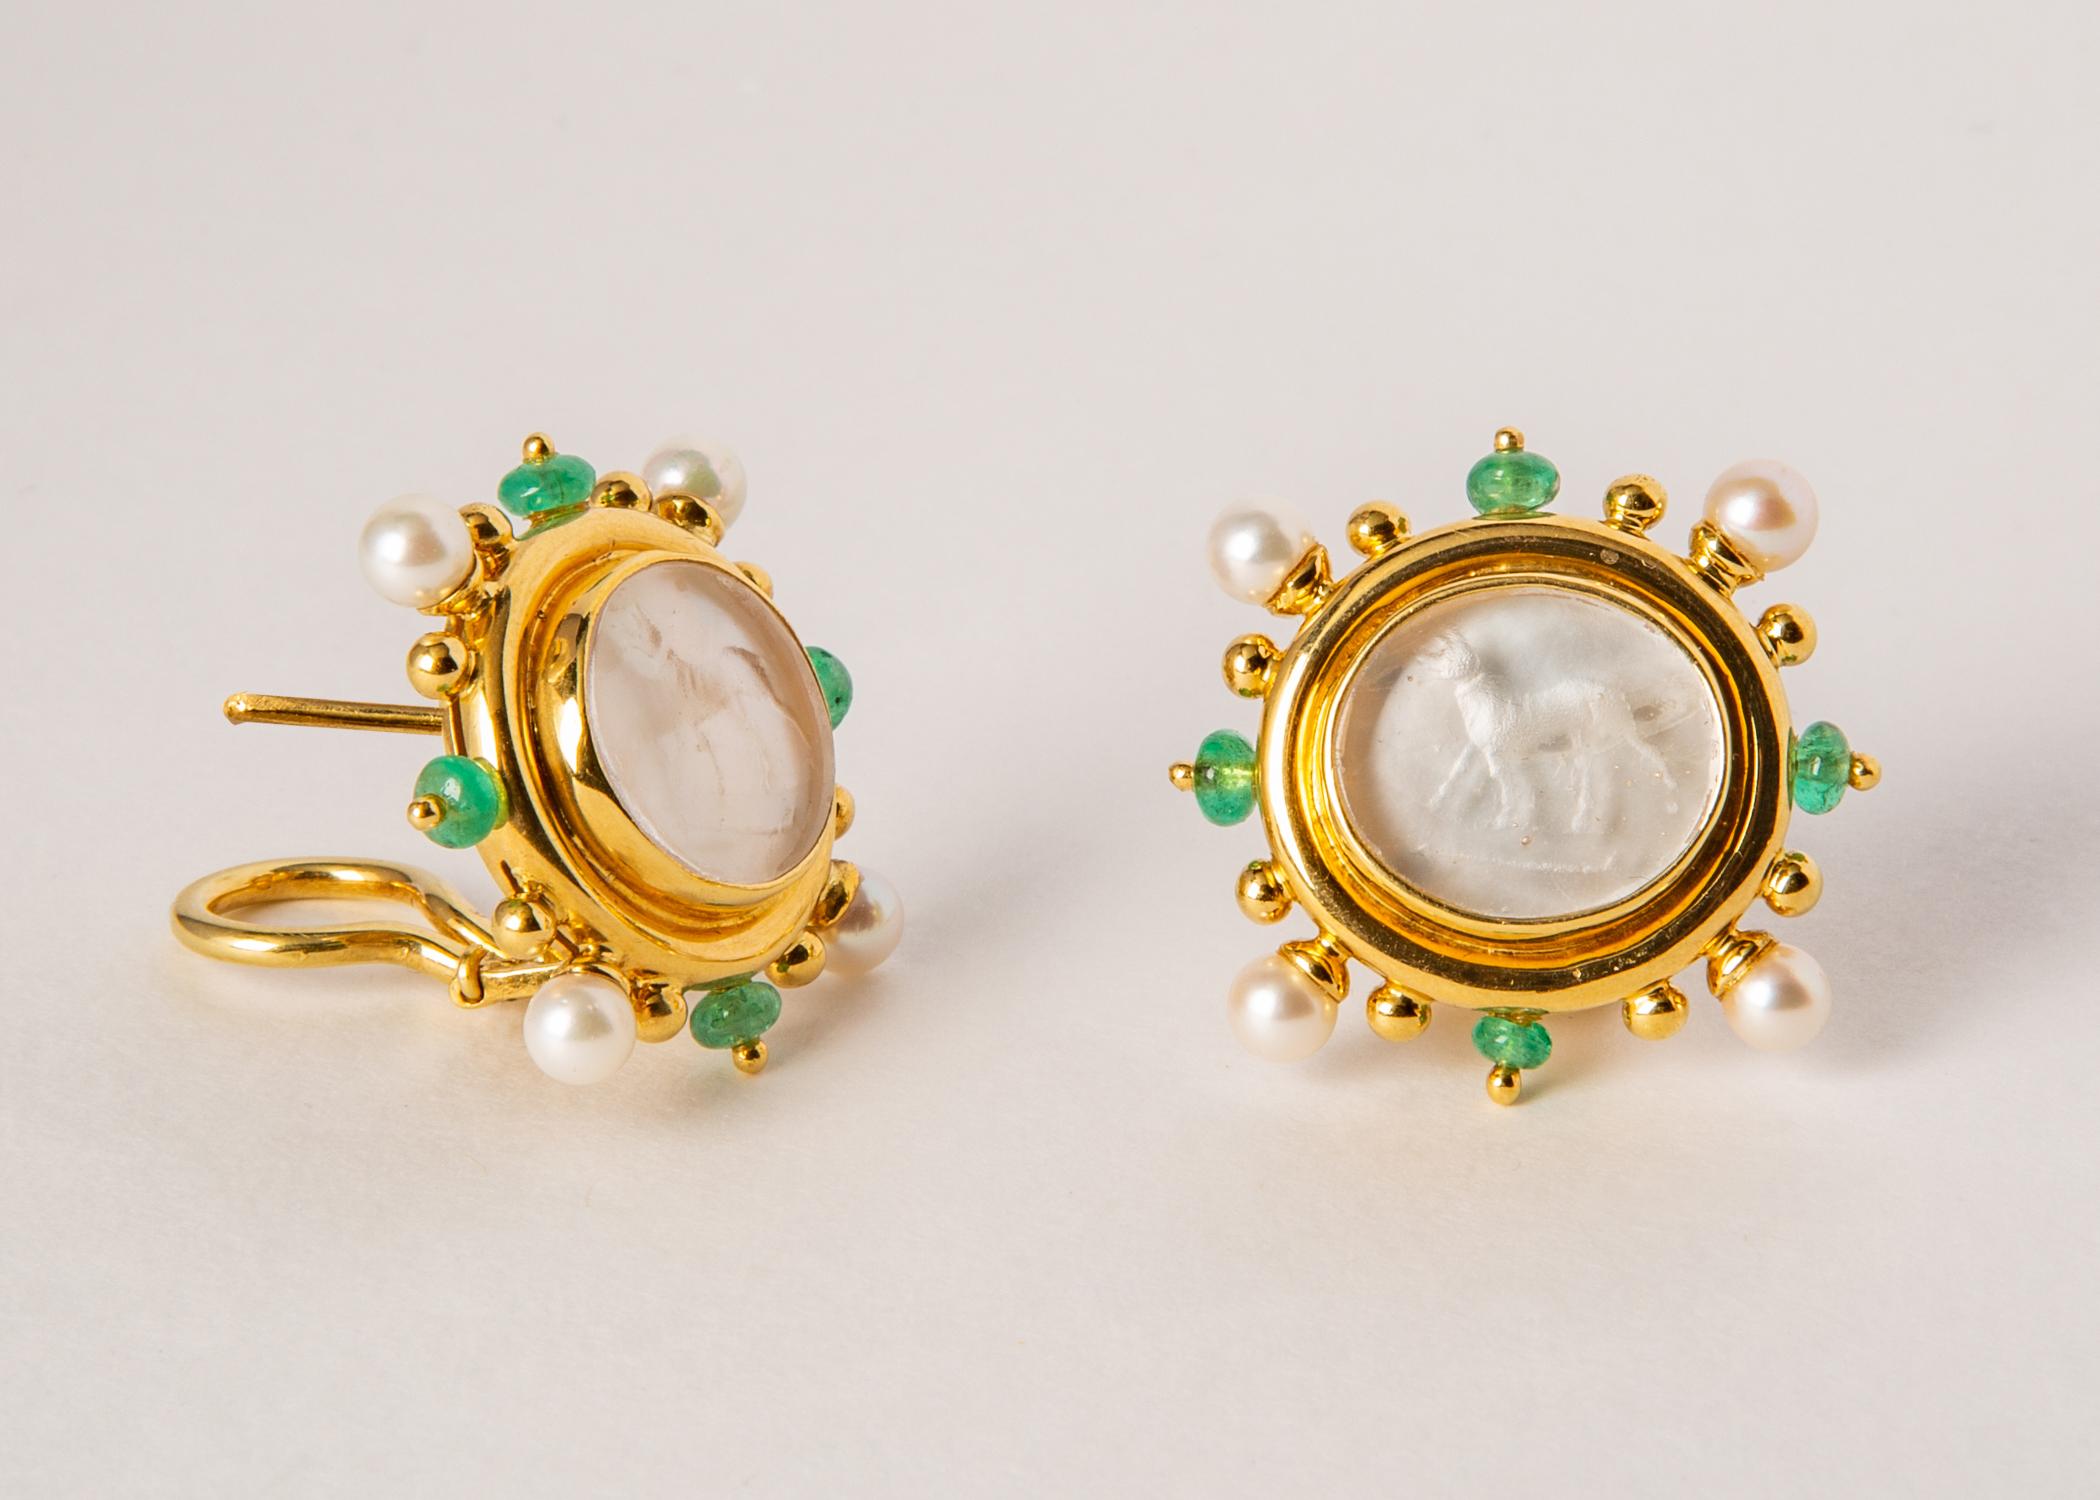 Elizabeth Locke is famous for her Venetian glass intaglios. This exceptional pair of earrings features a regal standing dog Venetian glass intaglio backed with mother of pearl and framed in 18k gold accented with cultured pearls and emerald beads. 